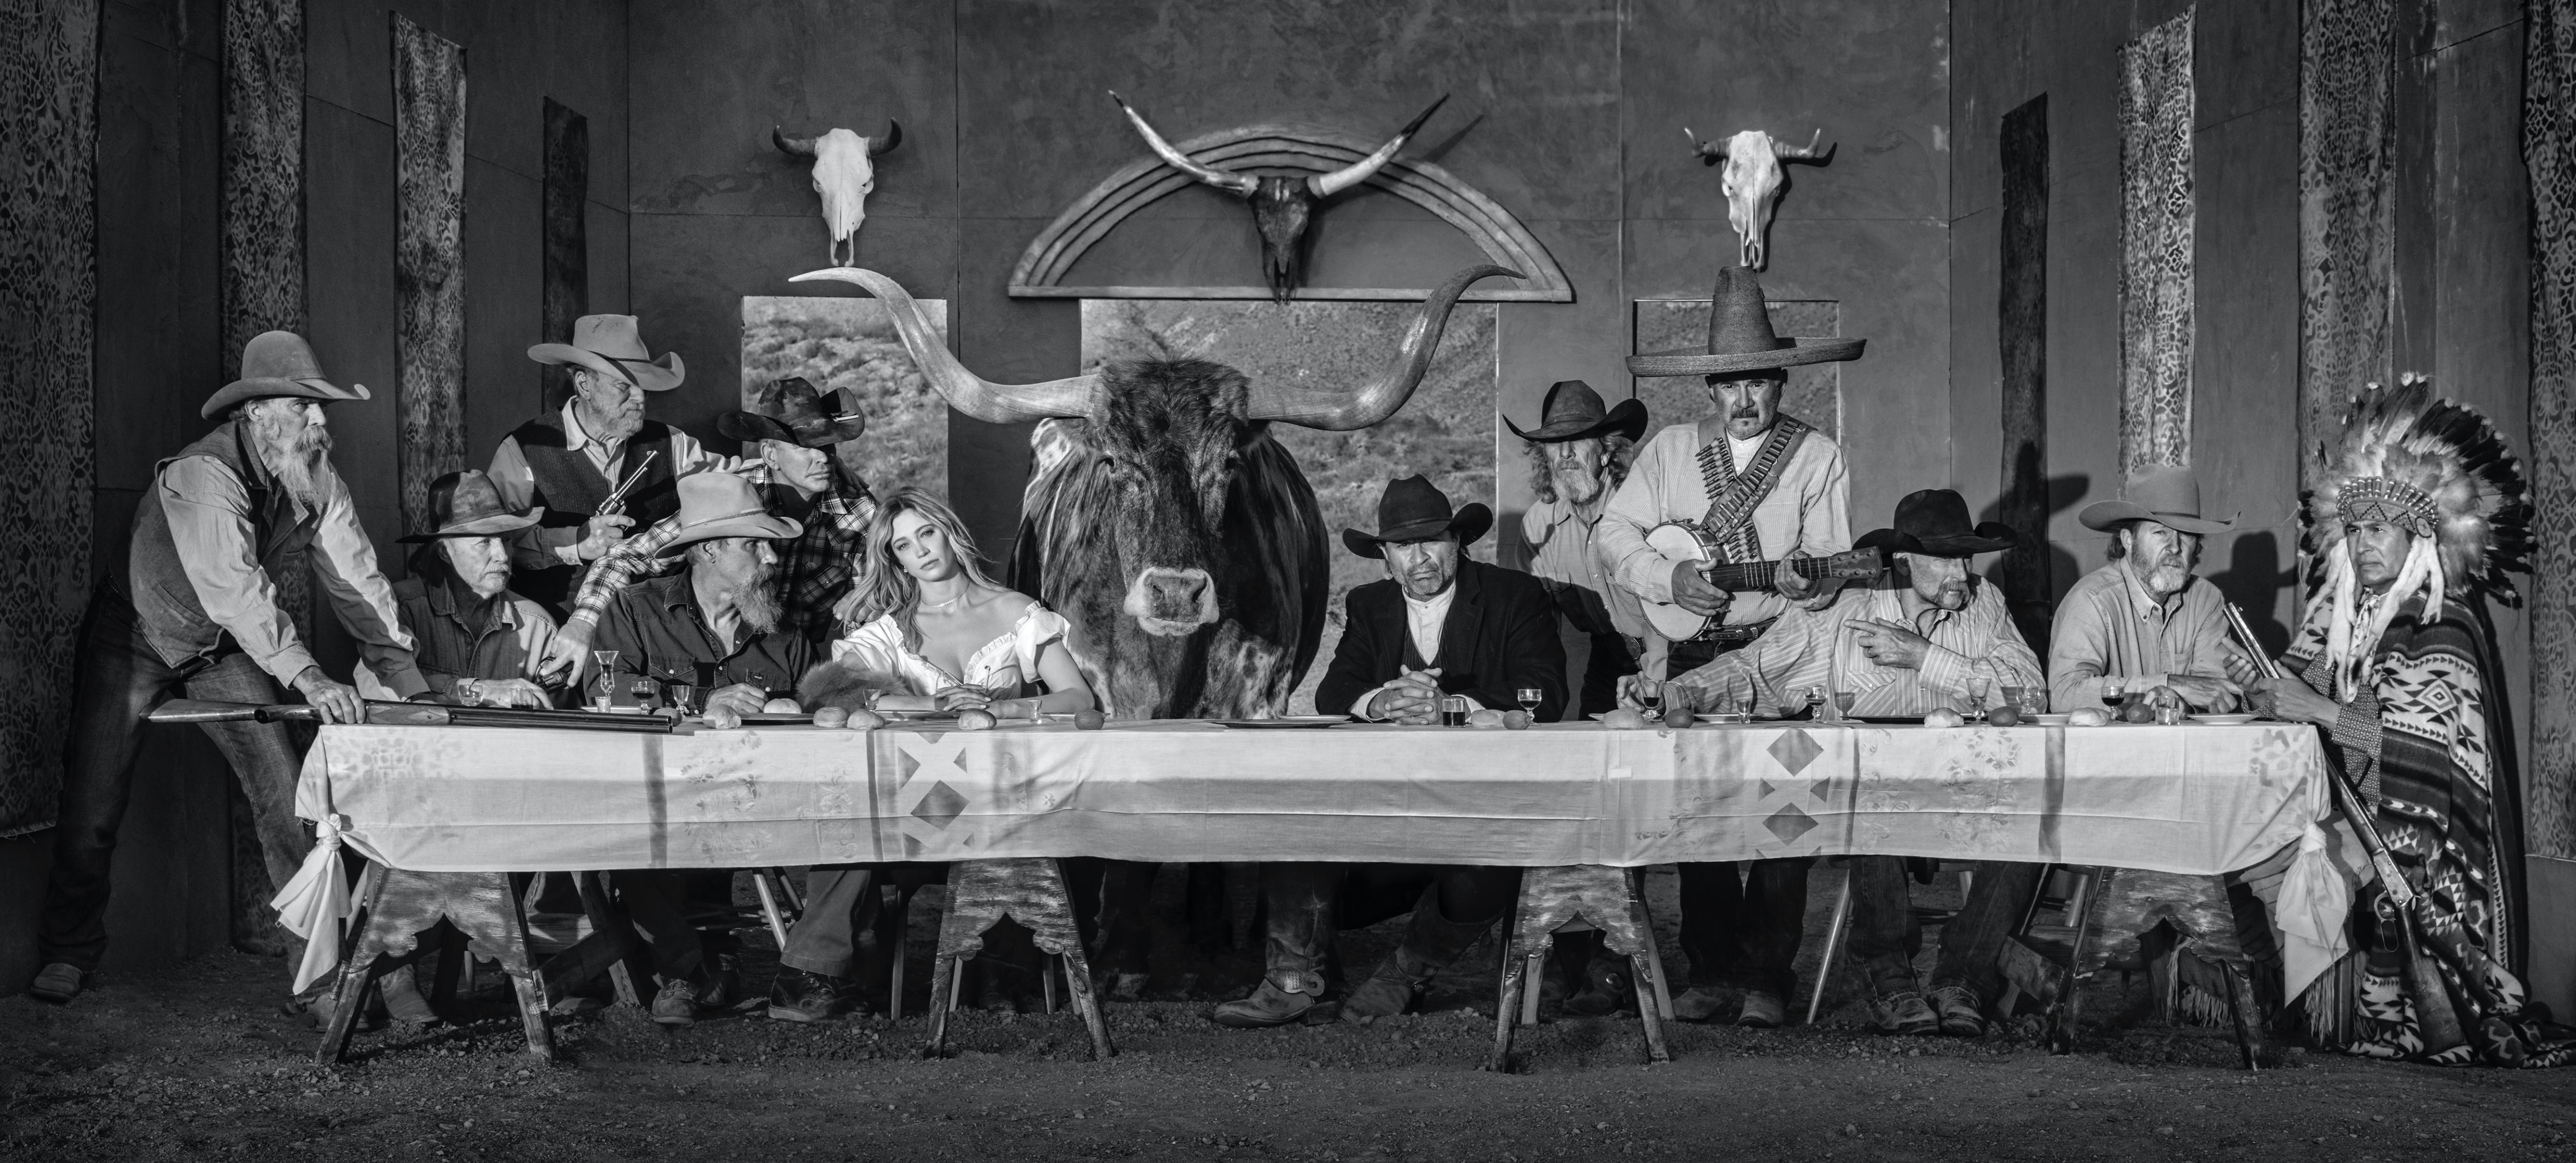 The Last Supper In Texas